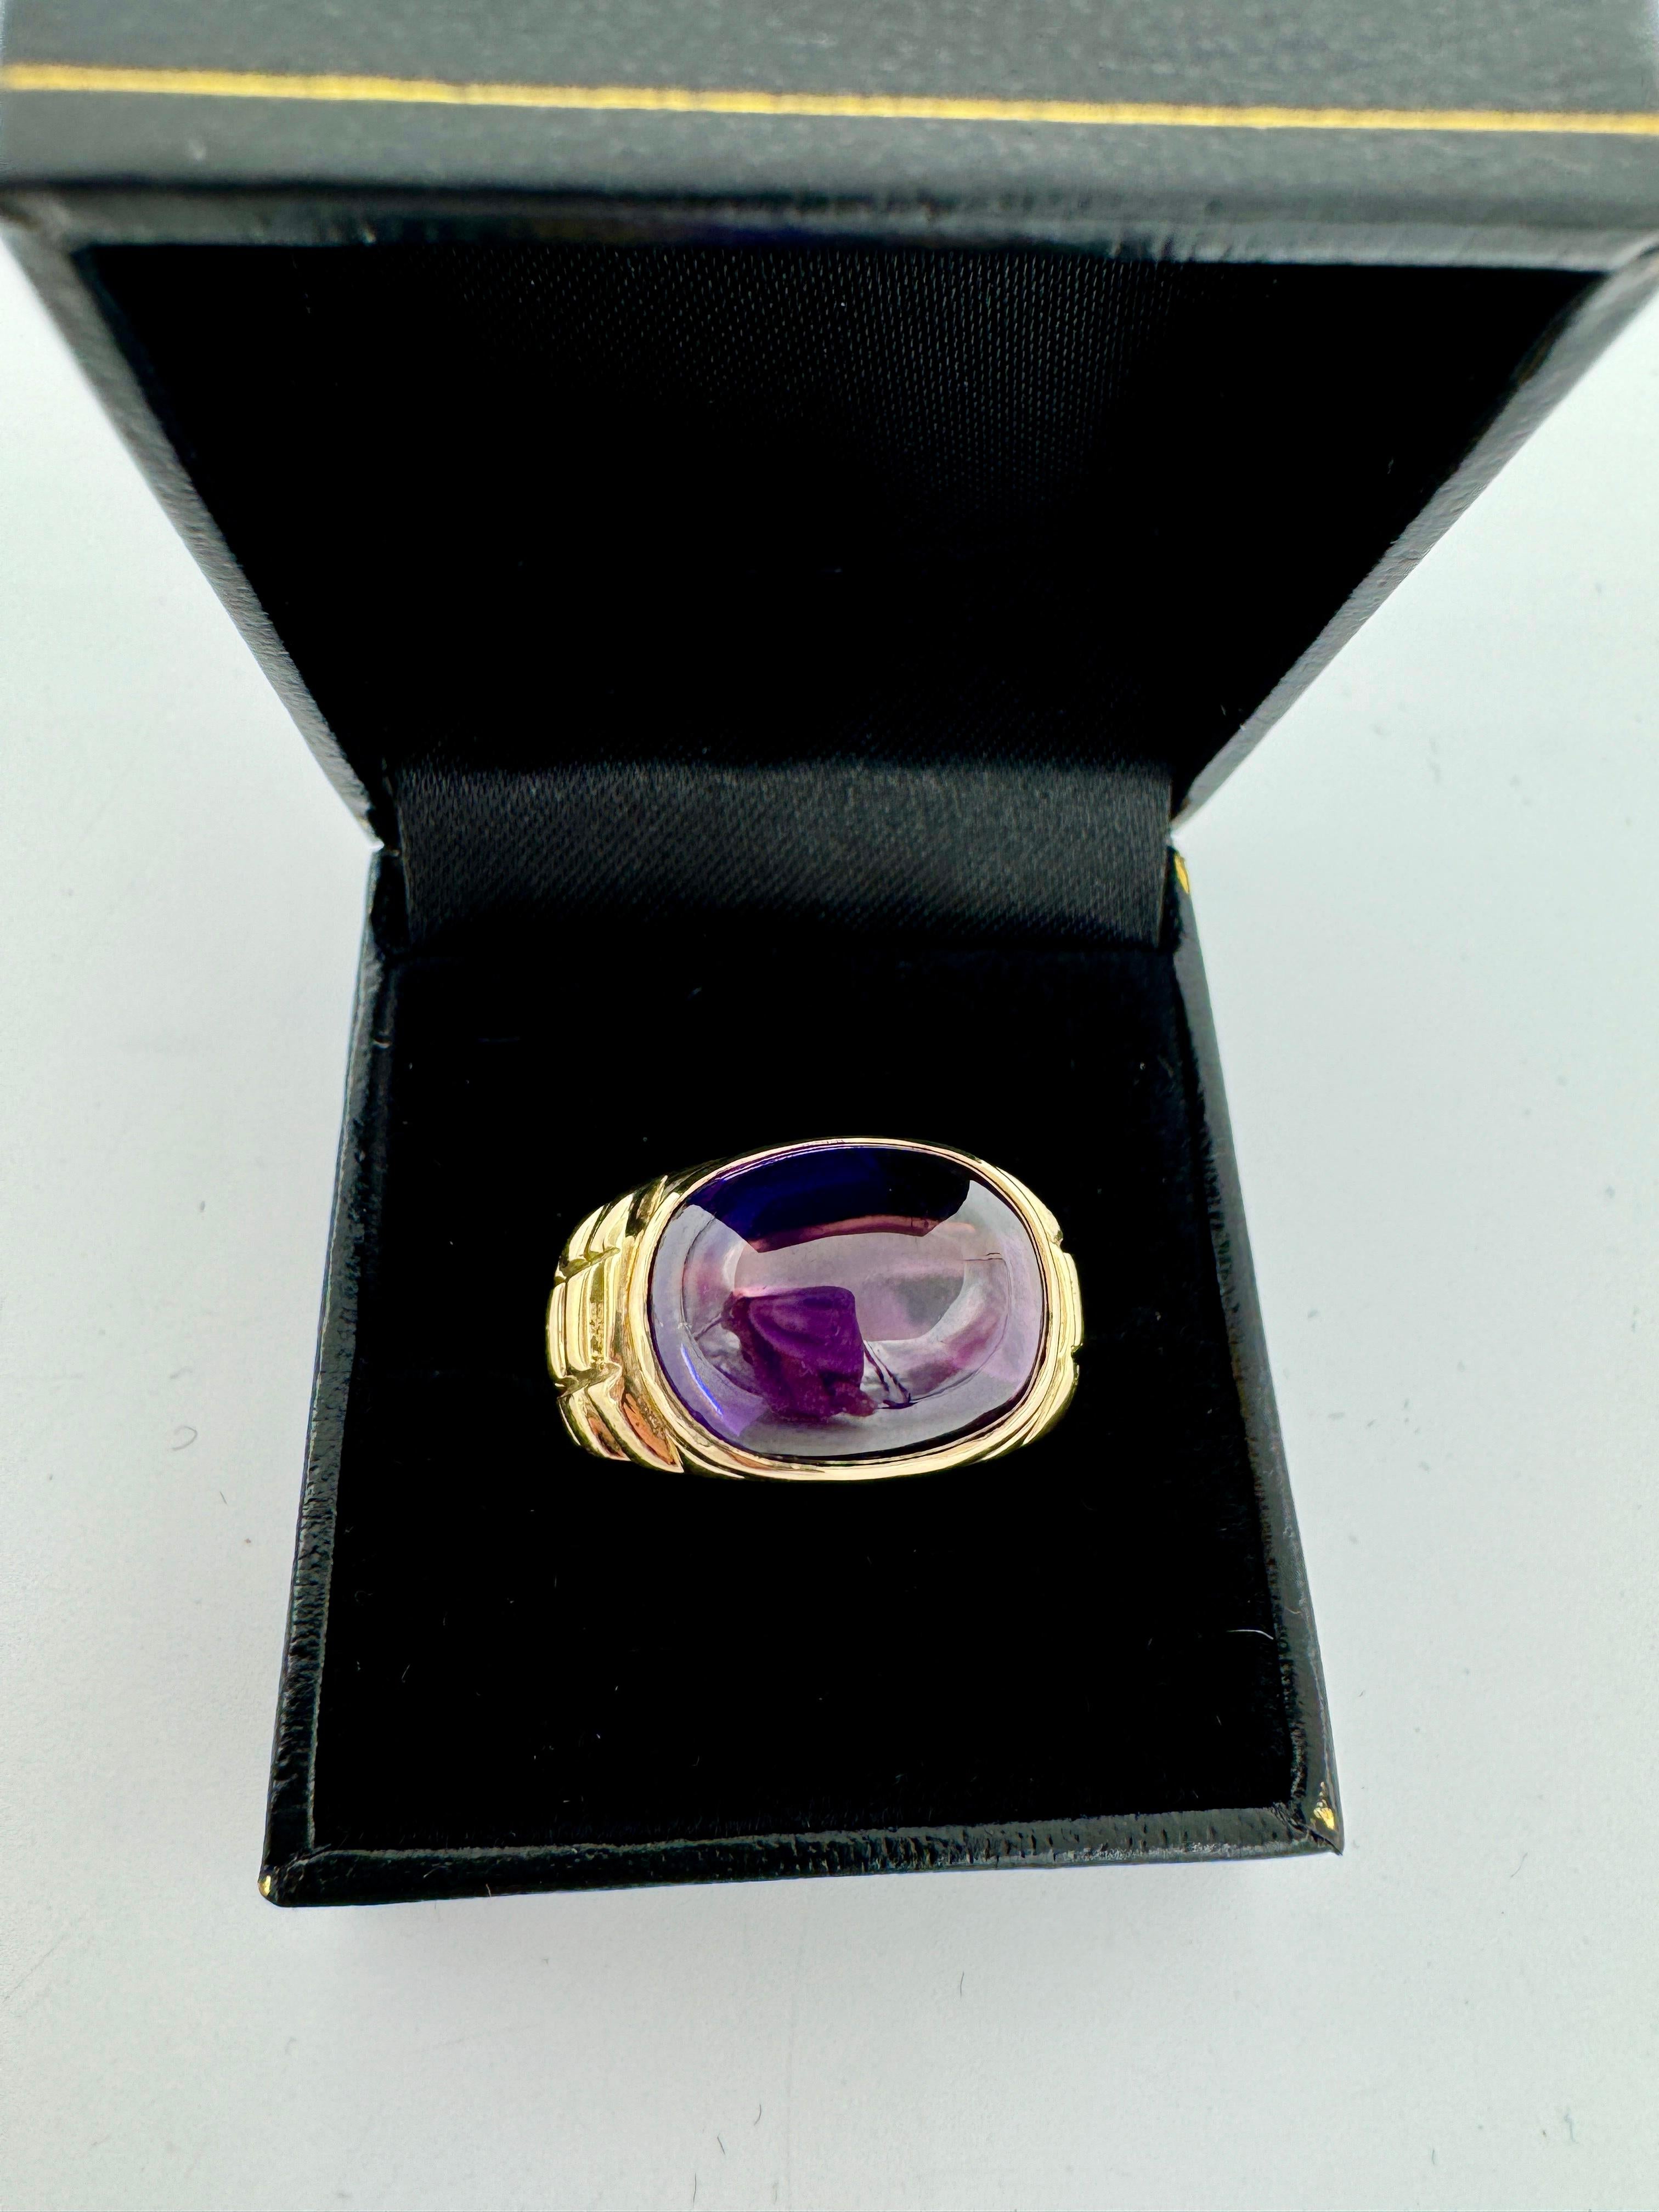 Estate cabochon Amethyst yellow gold ring, circa 1990s.

The Estate cabochon Amethyst yellow gold ring exudes elegance with its bold look.  The deep purple hue of the amethyst is complemented perfectly by the warm tones of the gold creating a